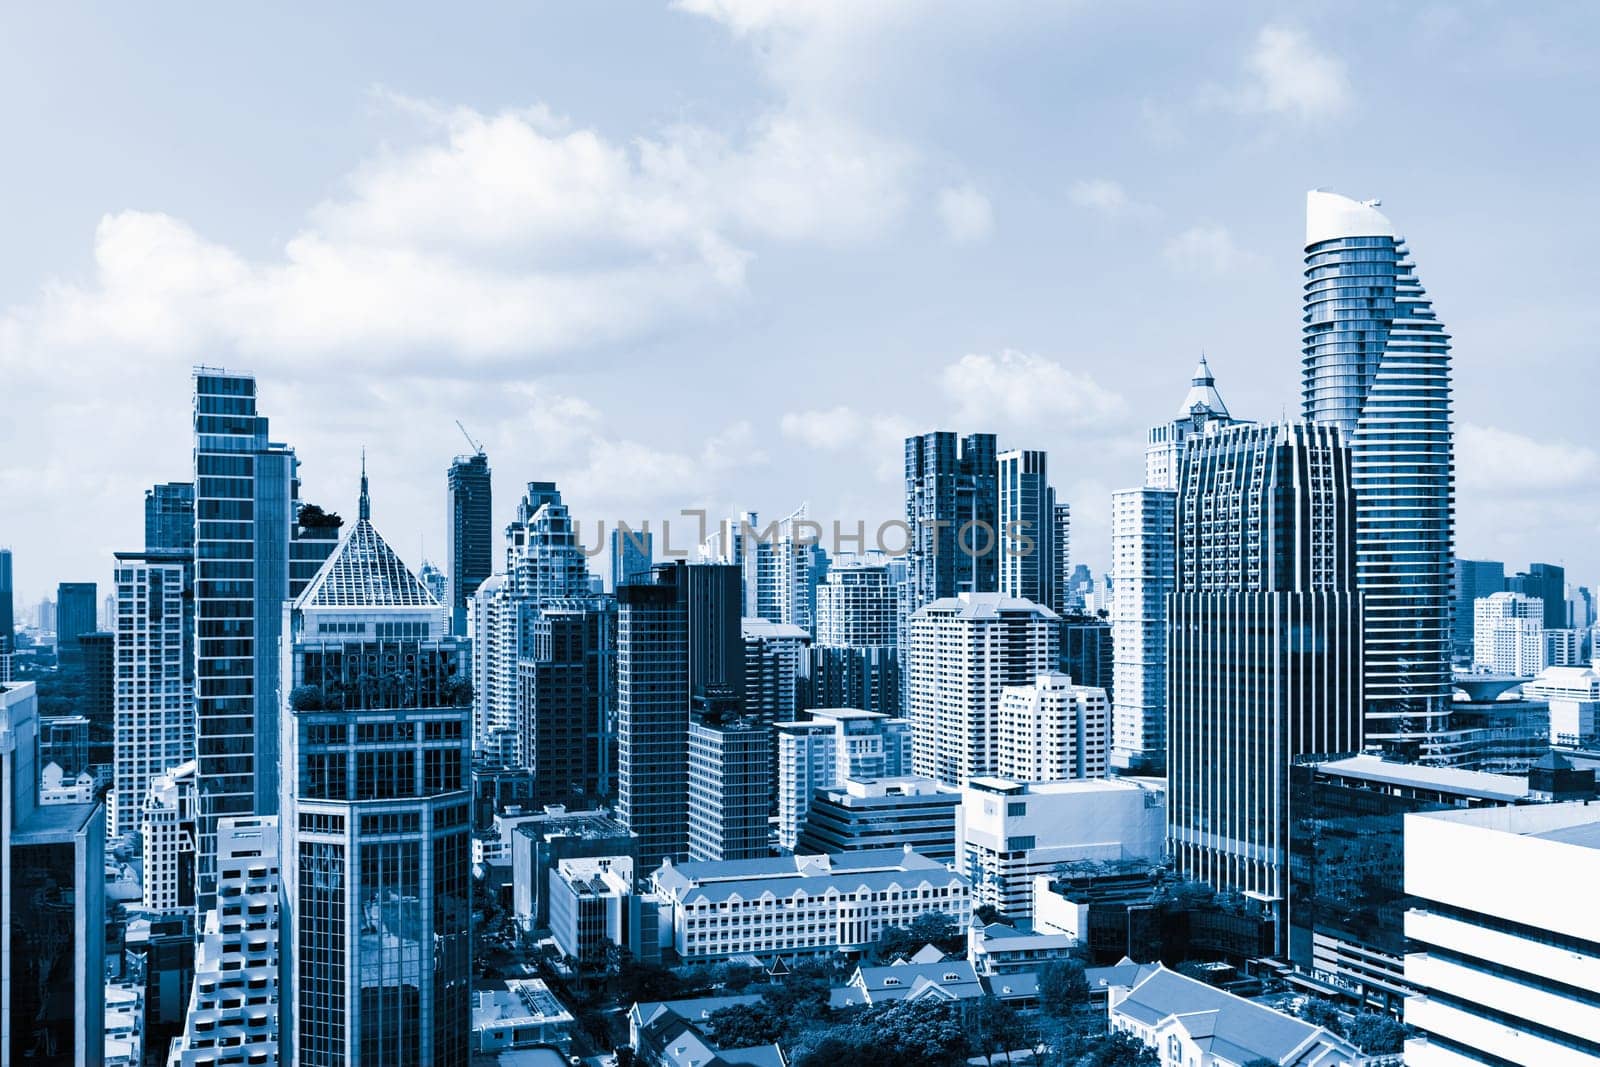 Closeup image of Bangkok cityscape. Modern skyscrapers with monochrome blue filter. Modern architectural building skyline with blue sky. Side view. Business background. Day light. Ornamented.